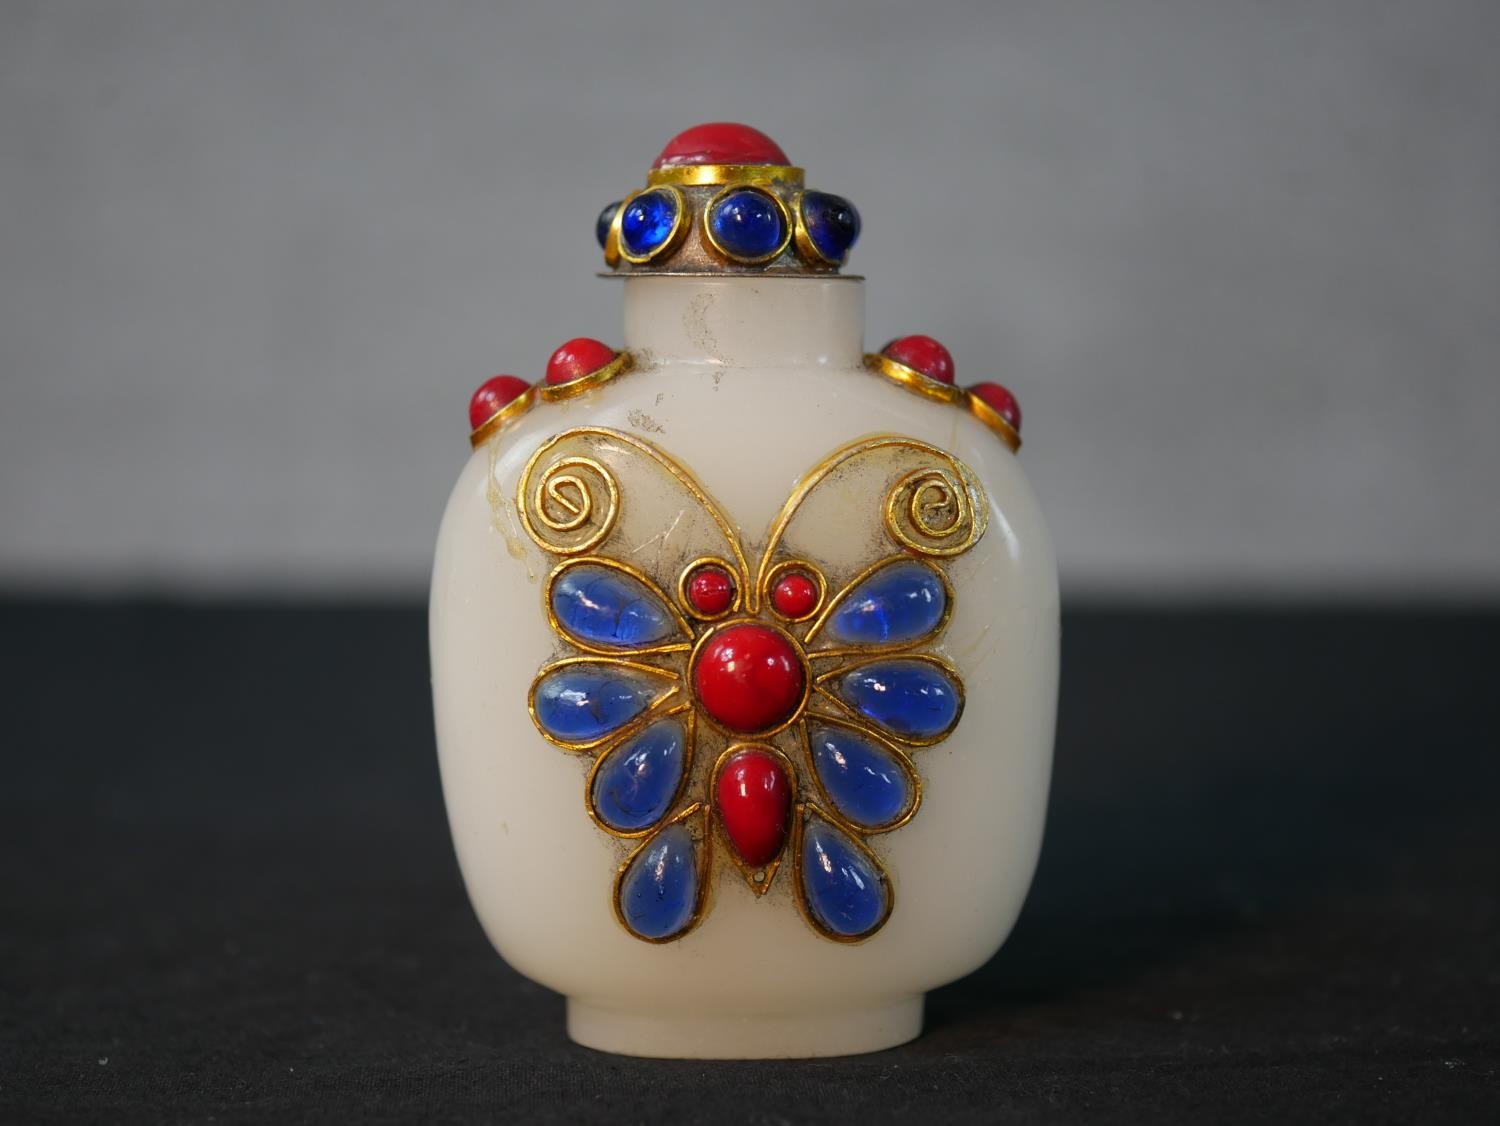 Four 20th century Chinese snuff bottles, one white porcelain with blue figural printed design, a - Image 4 of 6